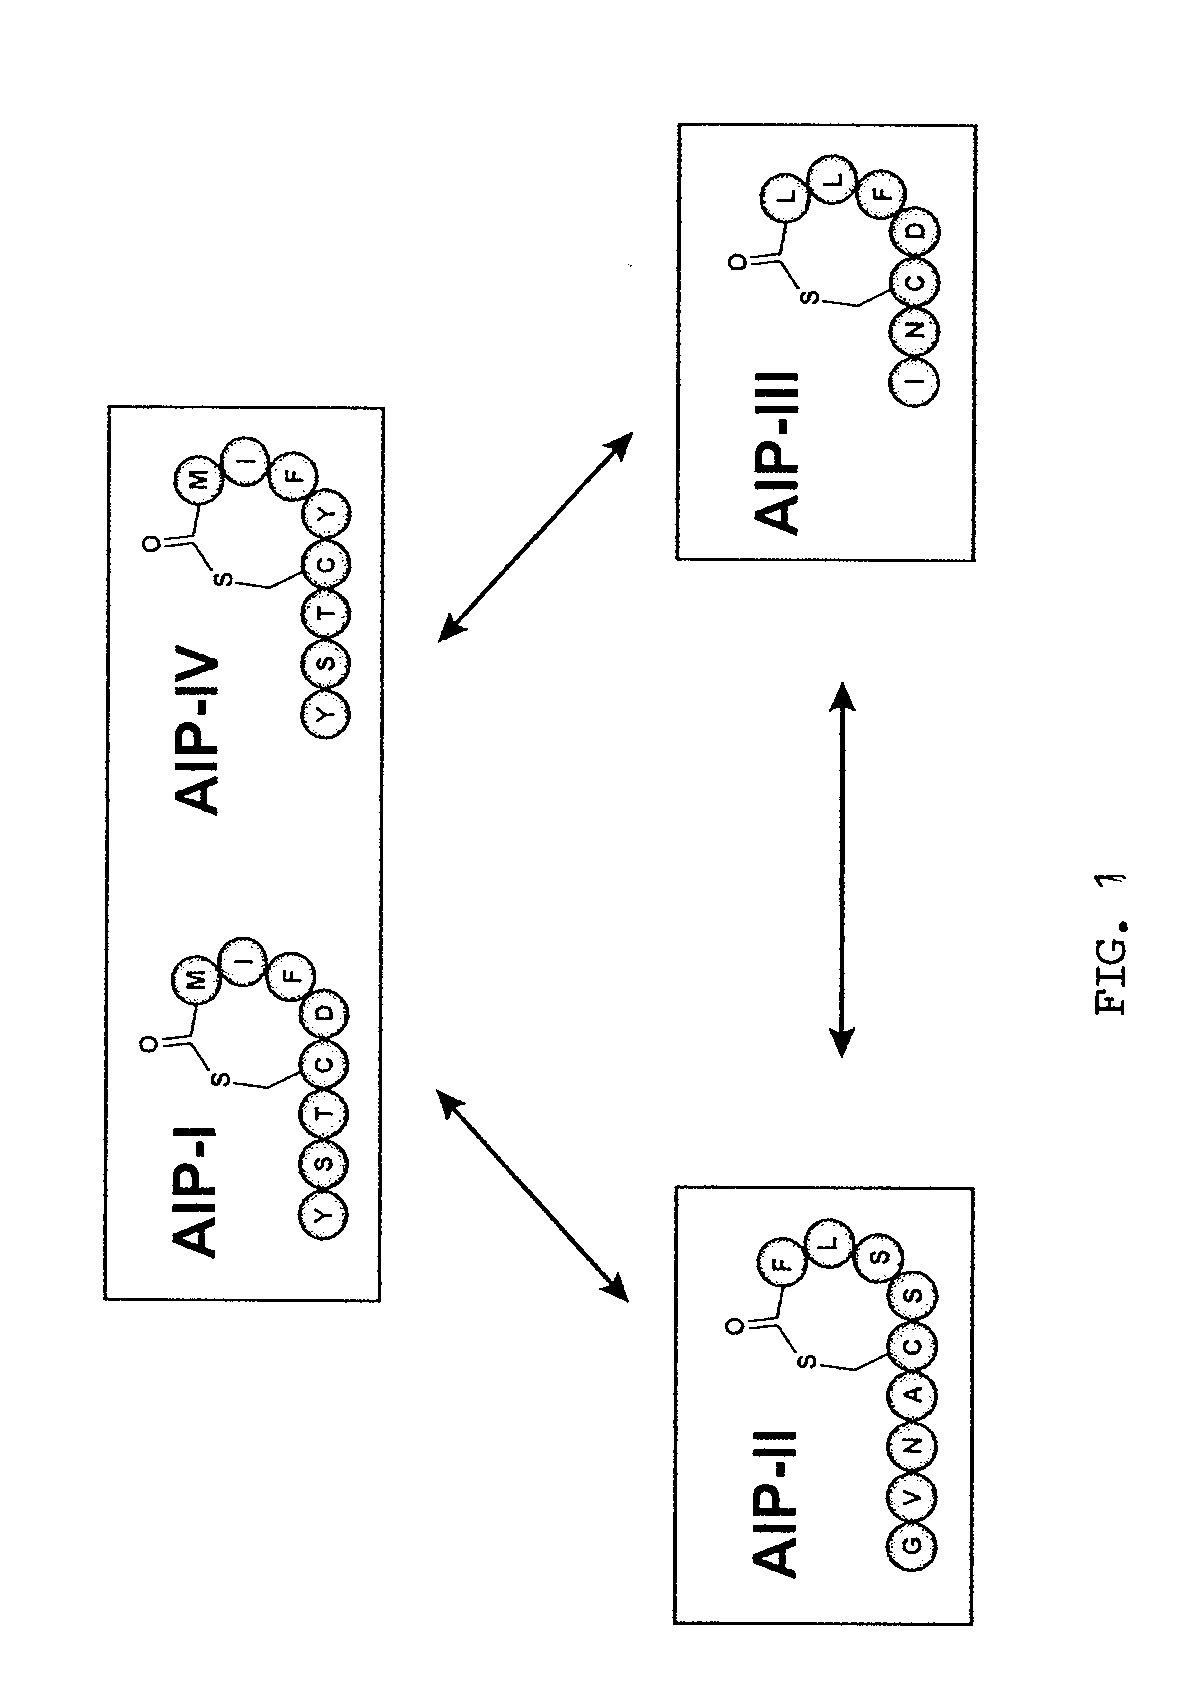 Method of Making Cyclic Polypeptides with Inteins